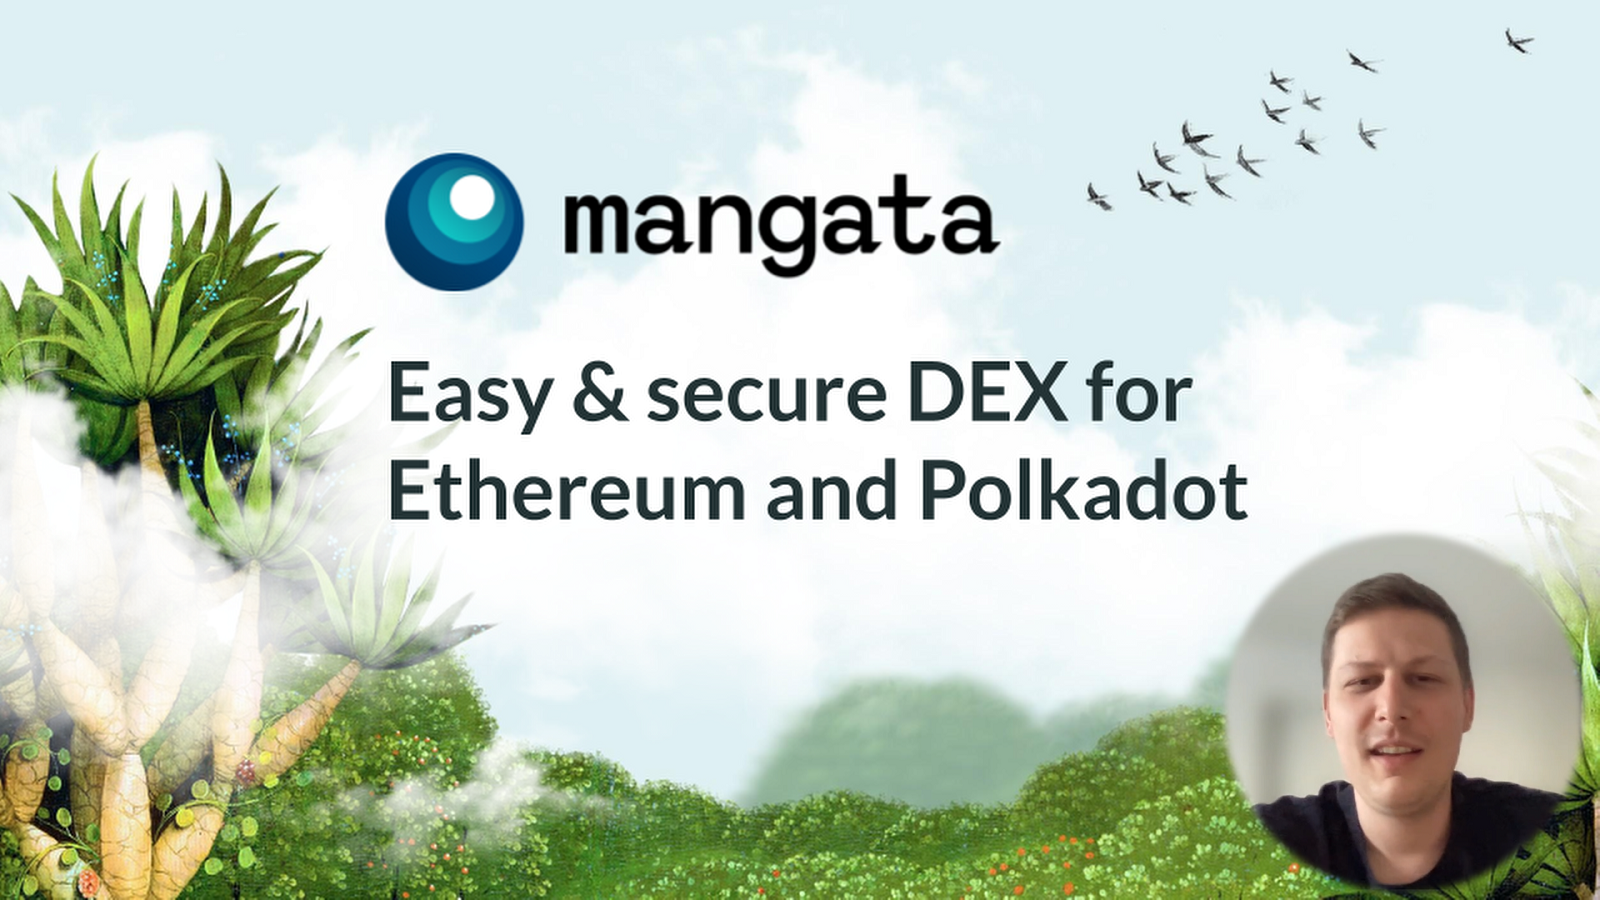 Our new Mangata Explainer Video is here!